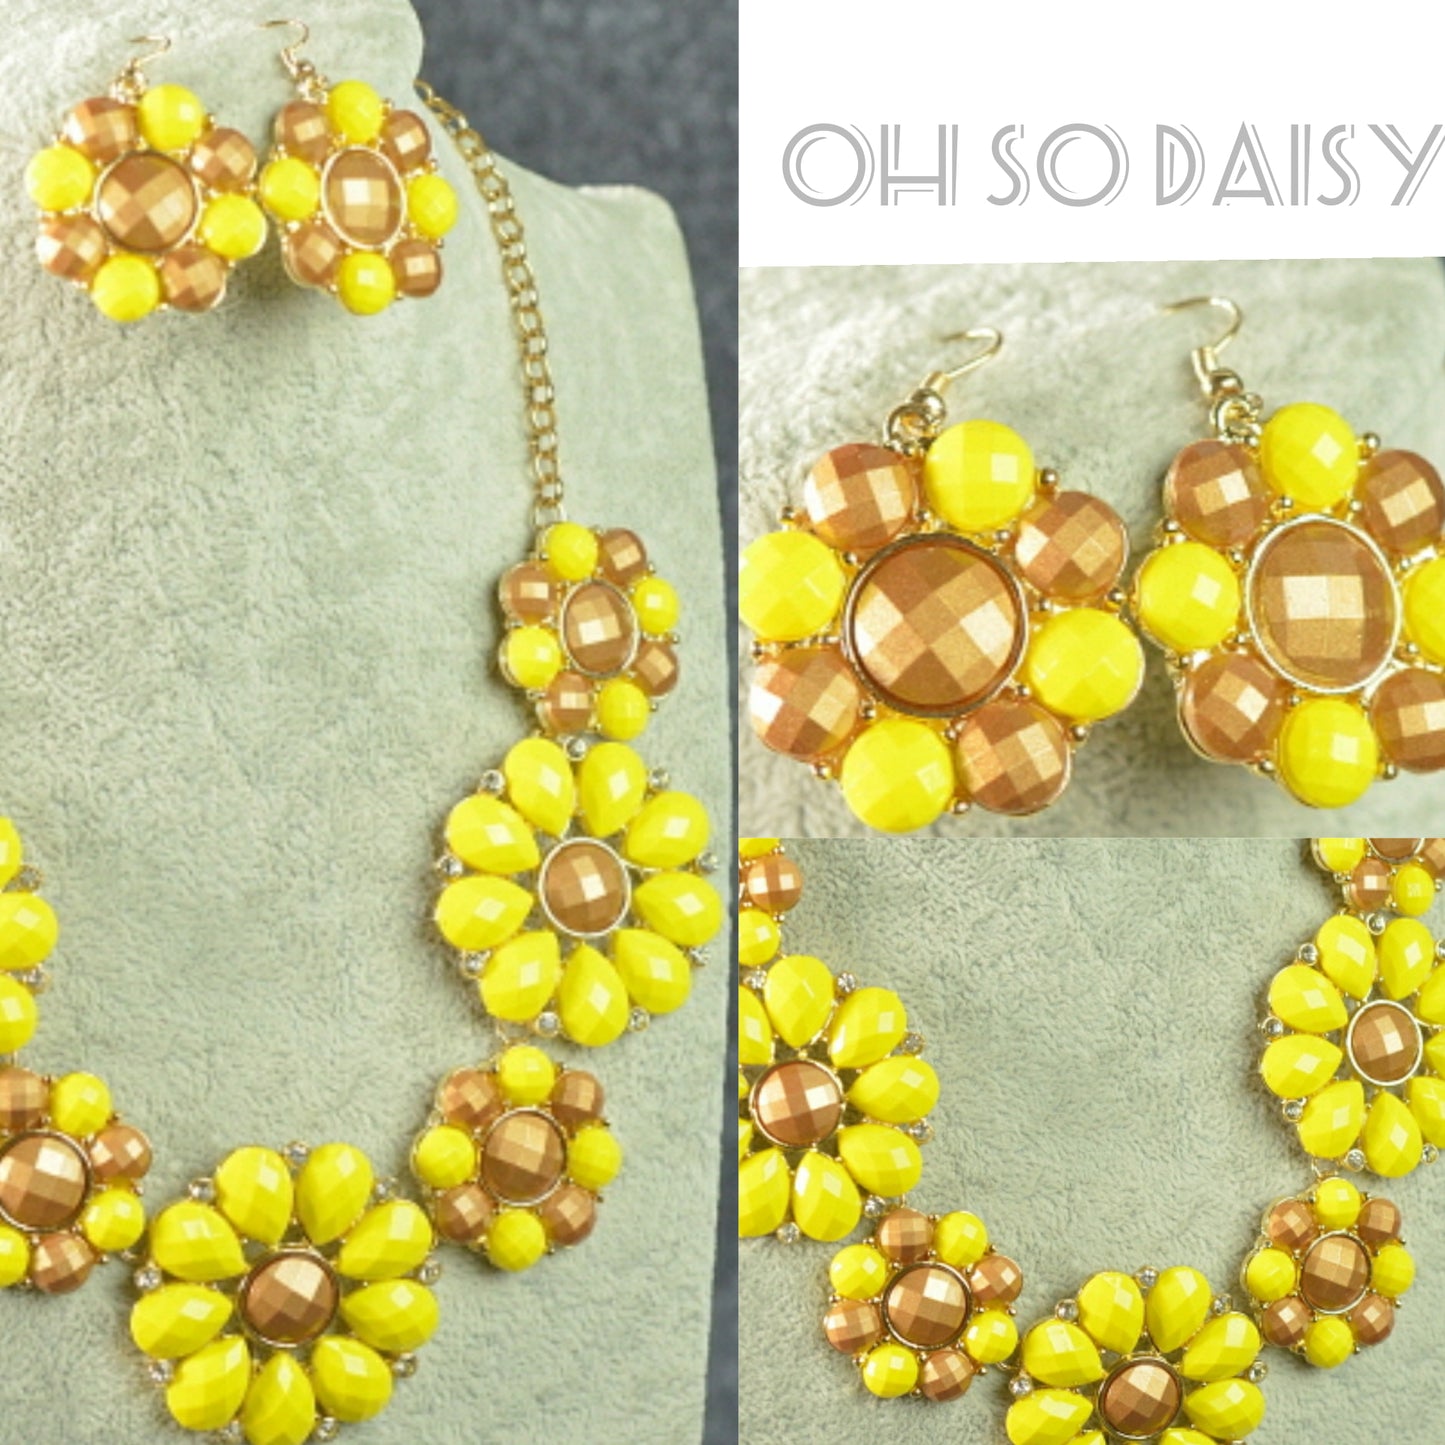 Oh So Daisy Flower Necklace And Earring Set